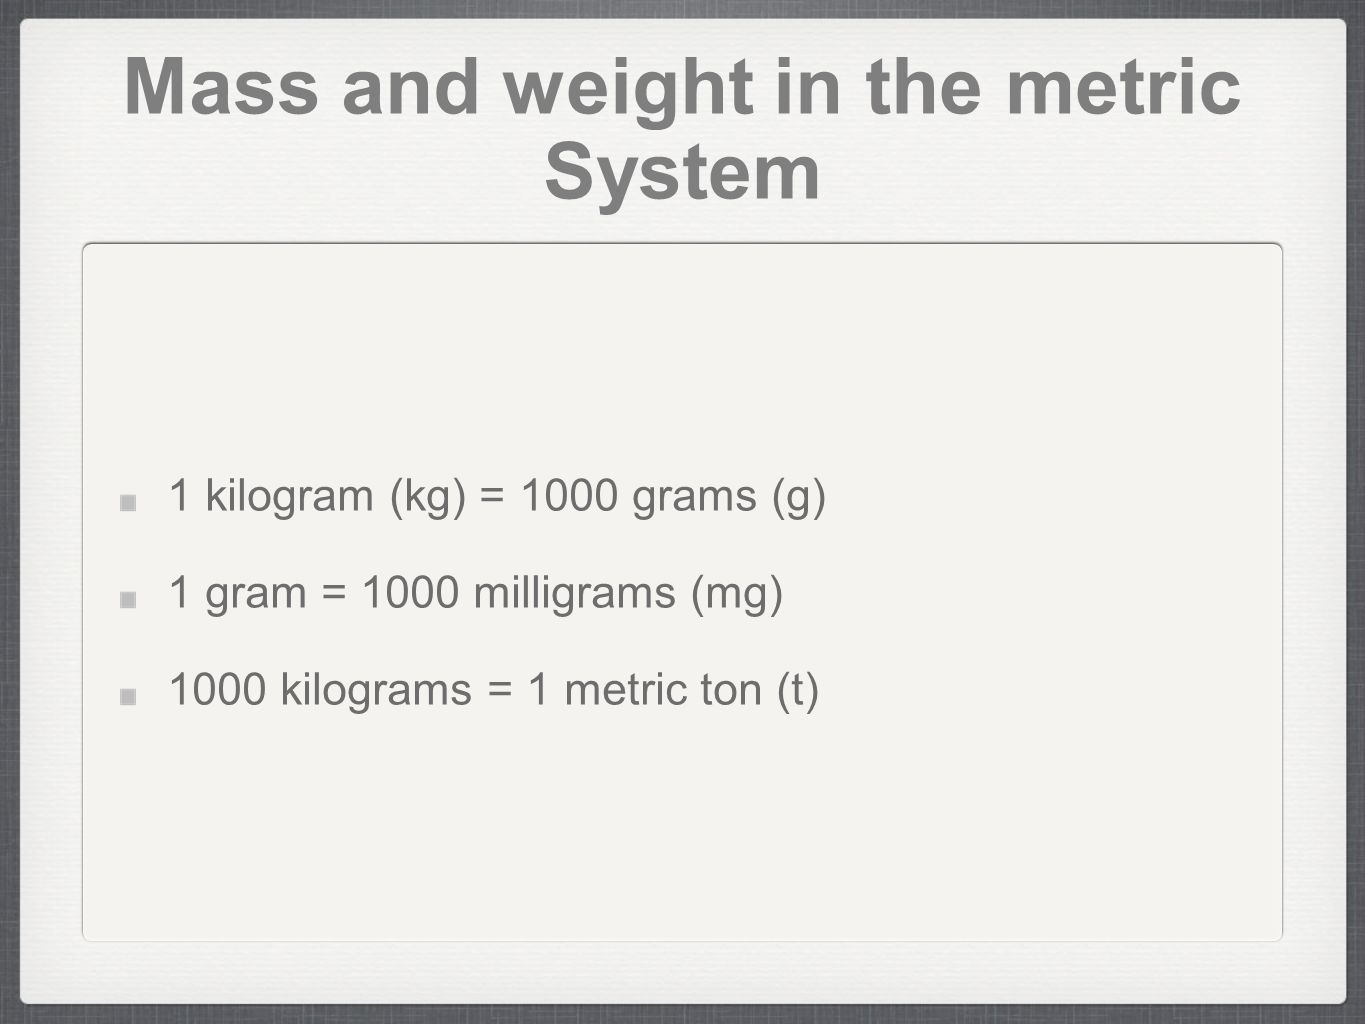 Mass and weight in the metric System